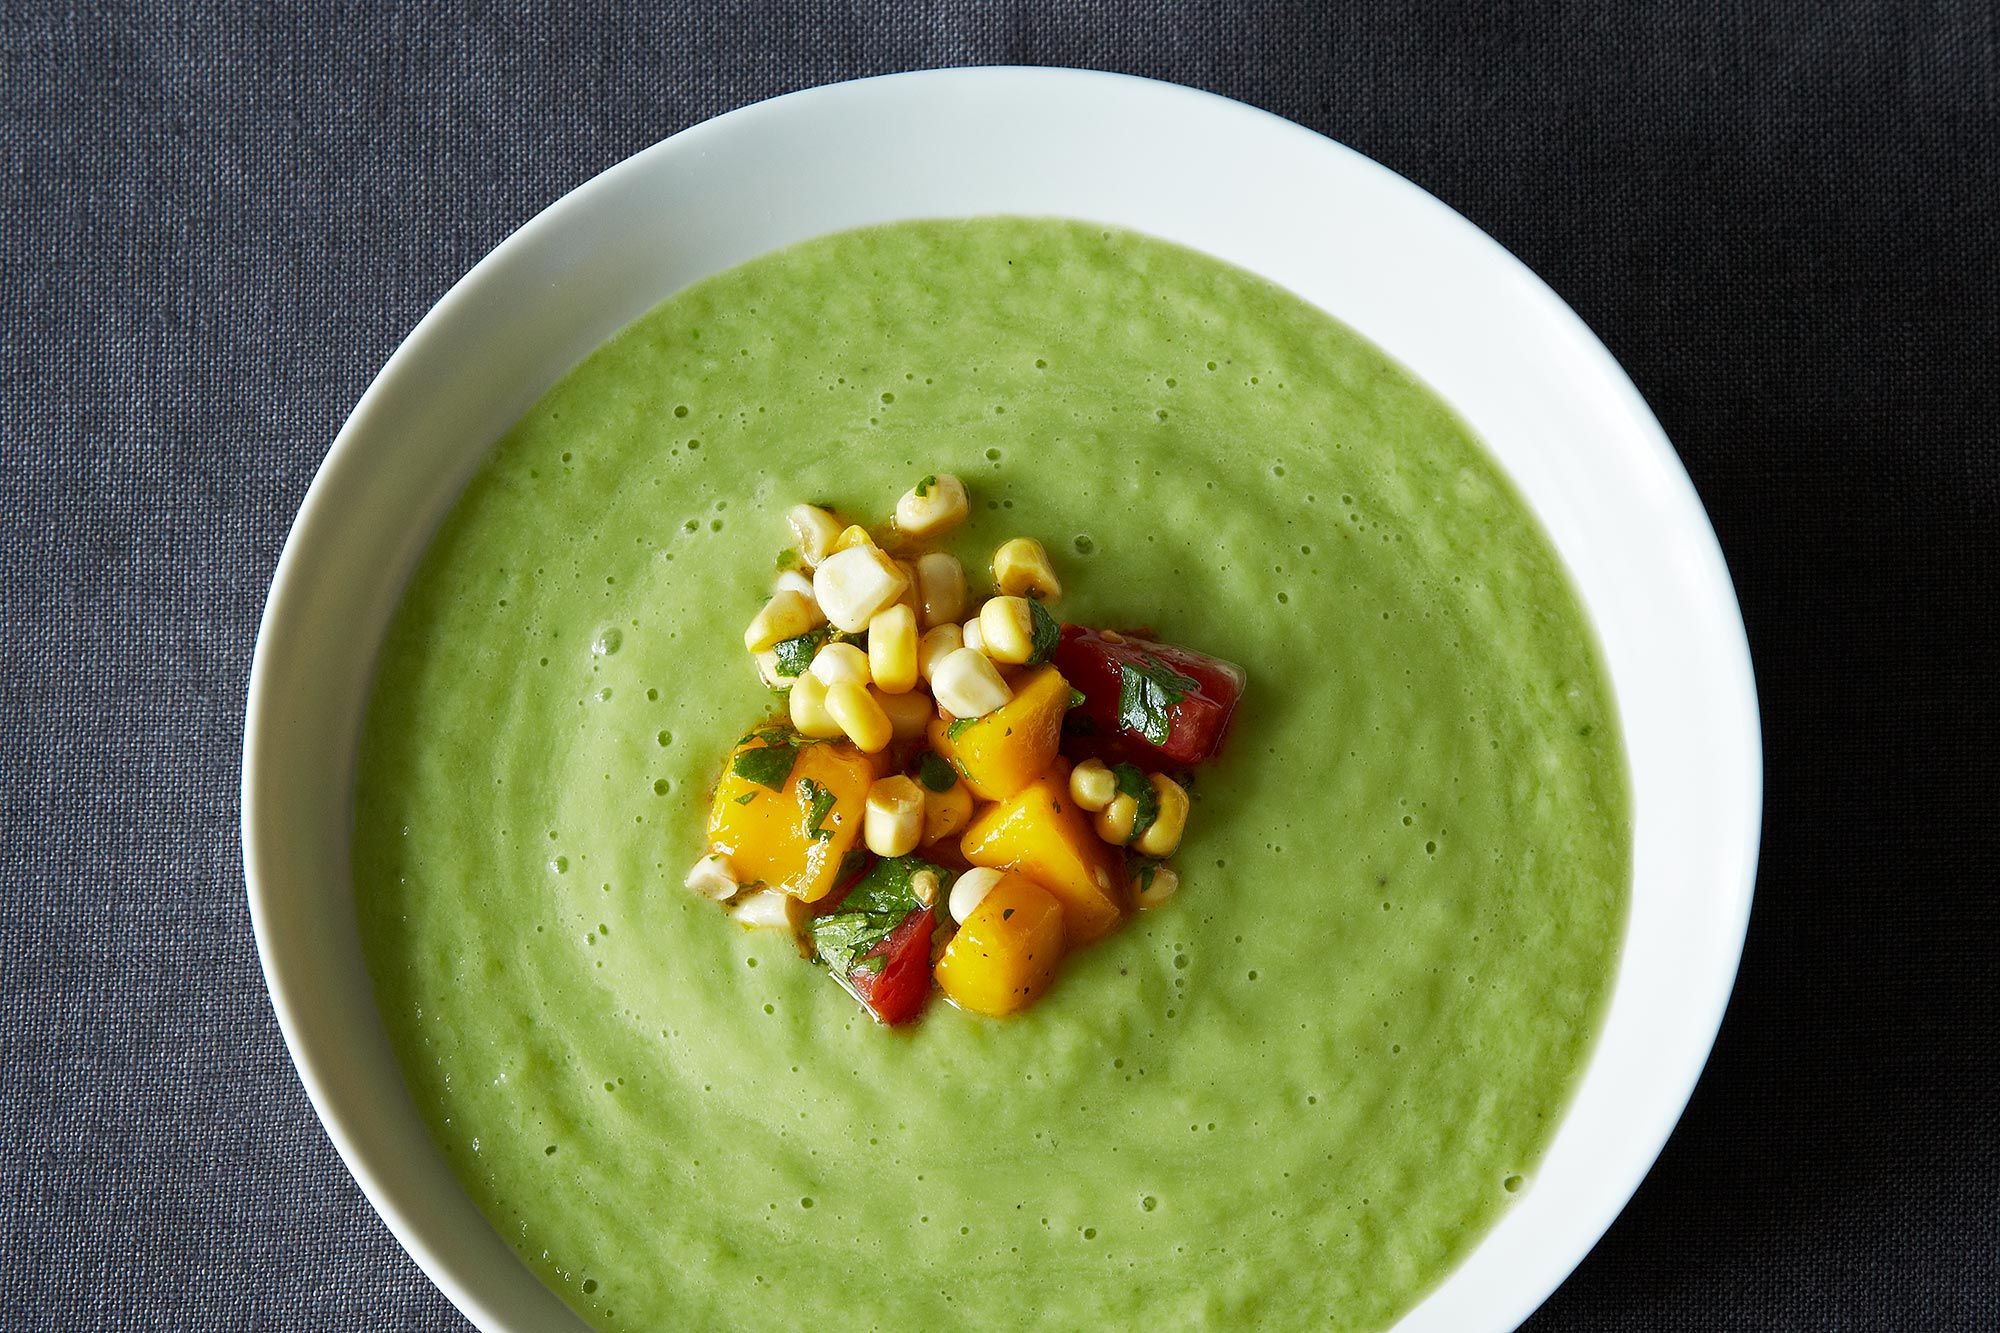 Chilled Cucumber and Avocado Soup on Food52